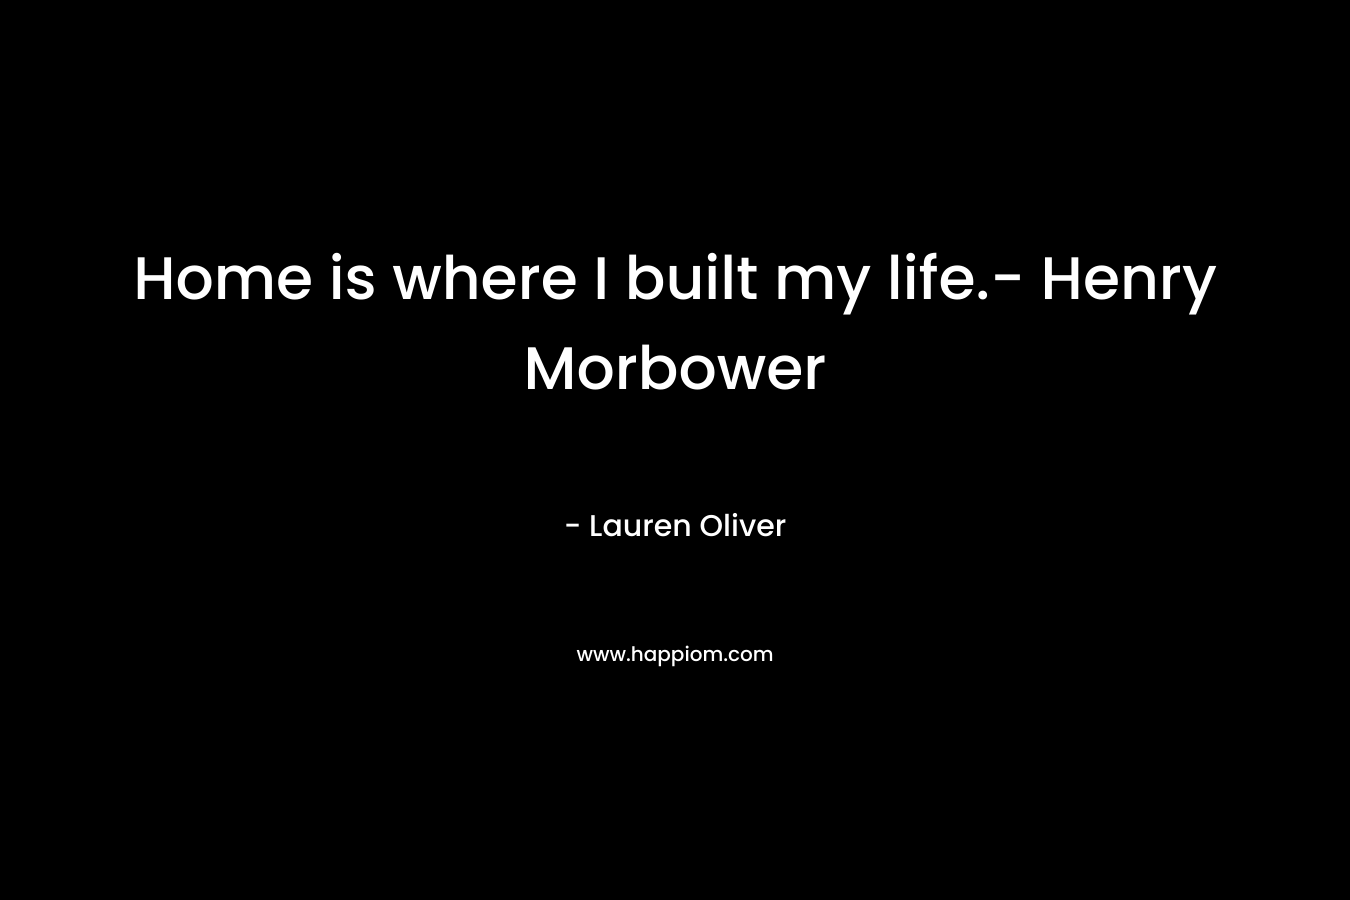 Home is where I built my life.- Henry Morbower